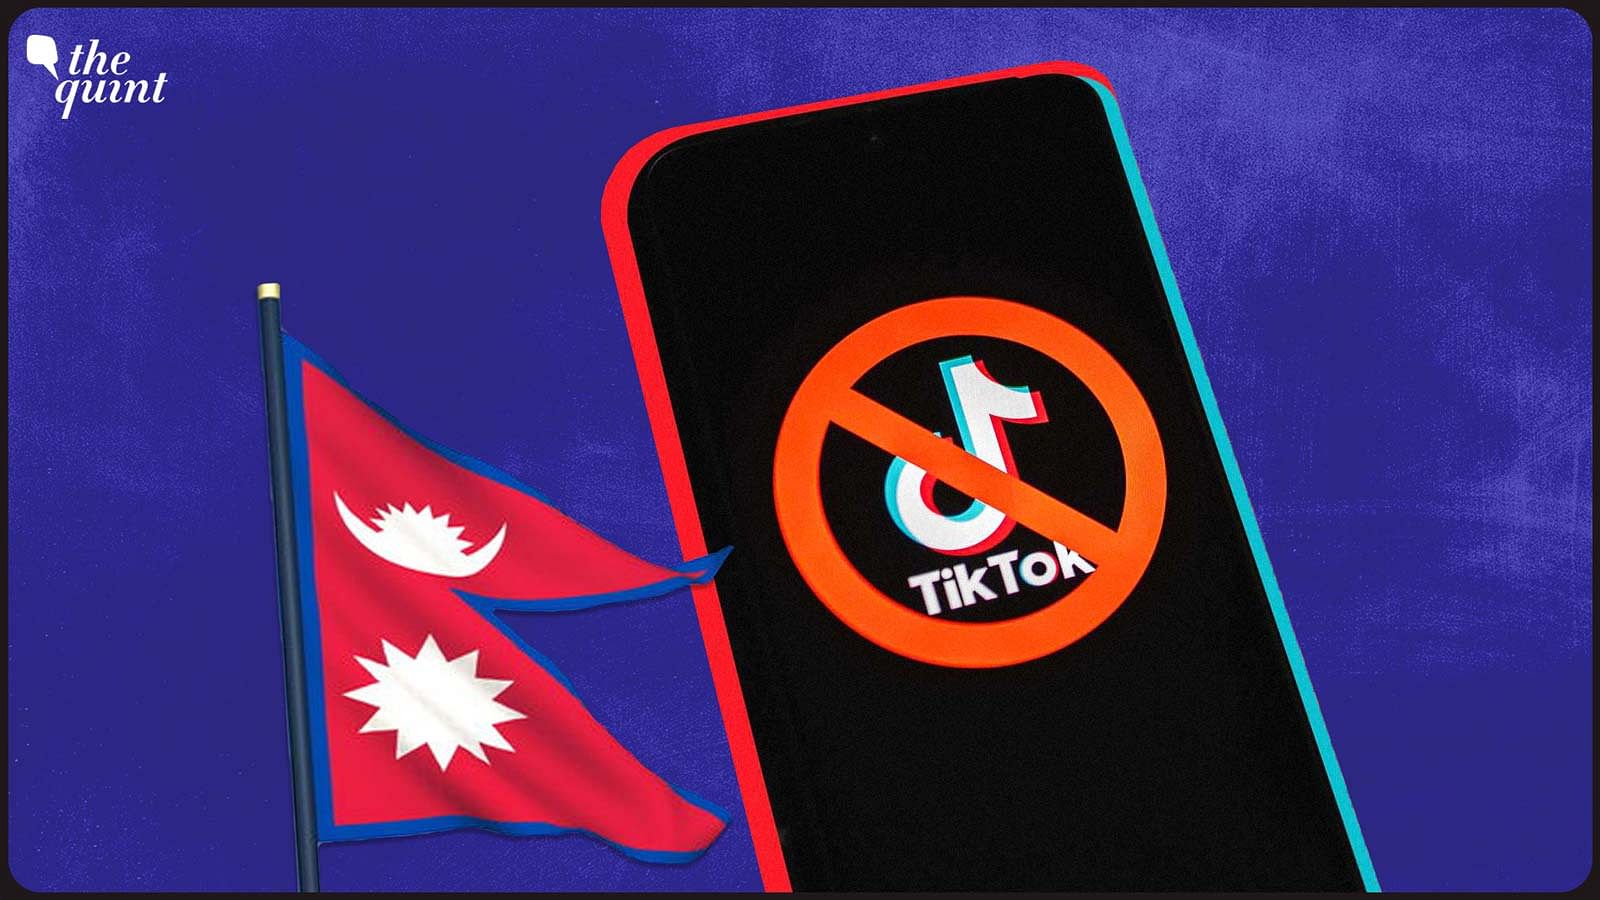 <div class="paragraphs"><p>The move comes days after the Nepalese government released a directive for social media platforms outlining forbidden content, which includes hate speech, the promotion of sexual exploitation and drugs, <a href="https://www.thequint.com/topic/fake-news">fake news</a>, terrorism-related messages, and private photos posted without consent.</p></div>